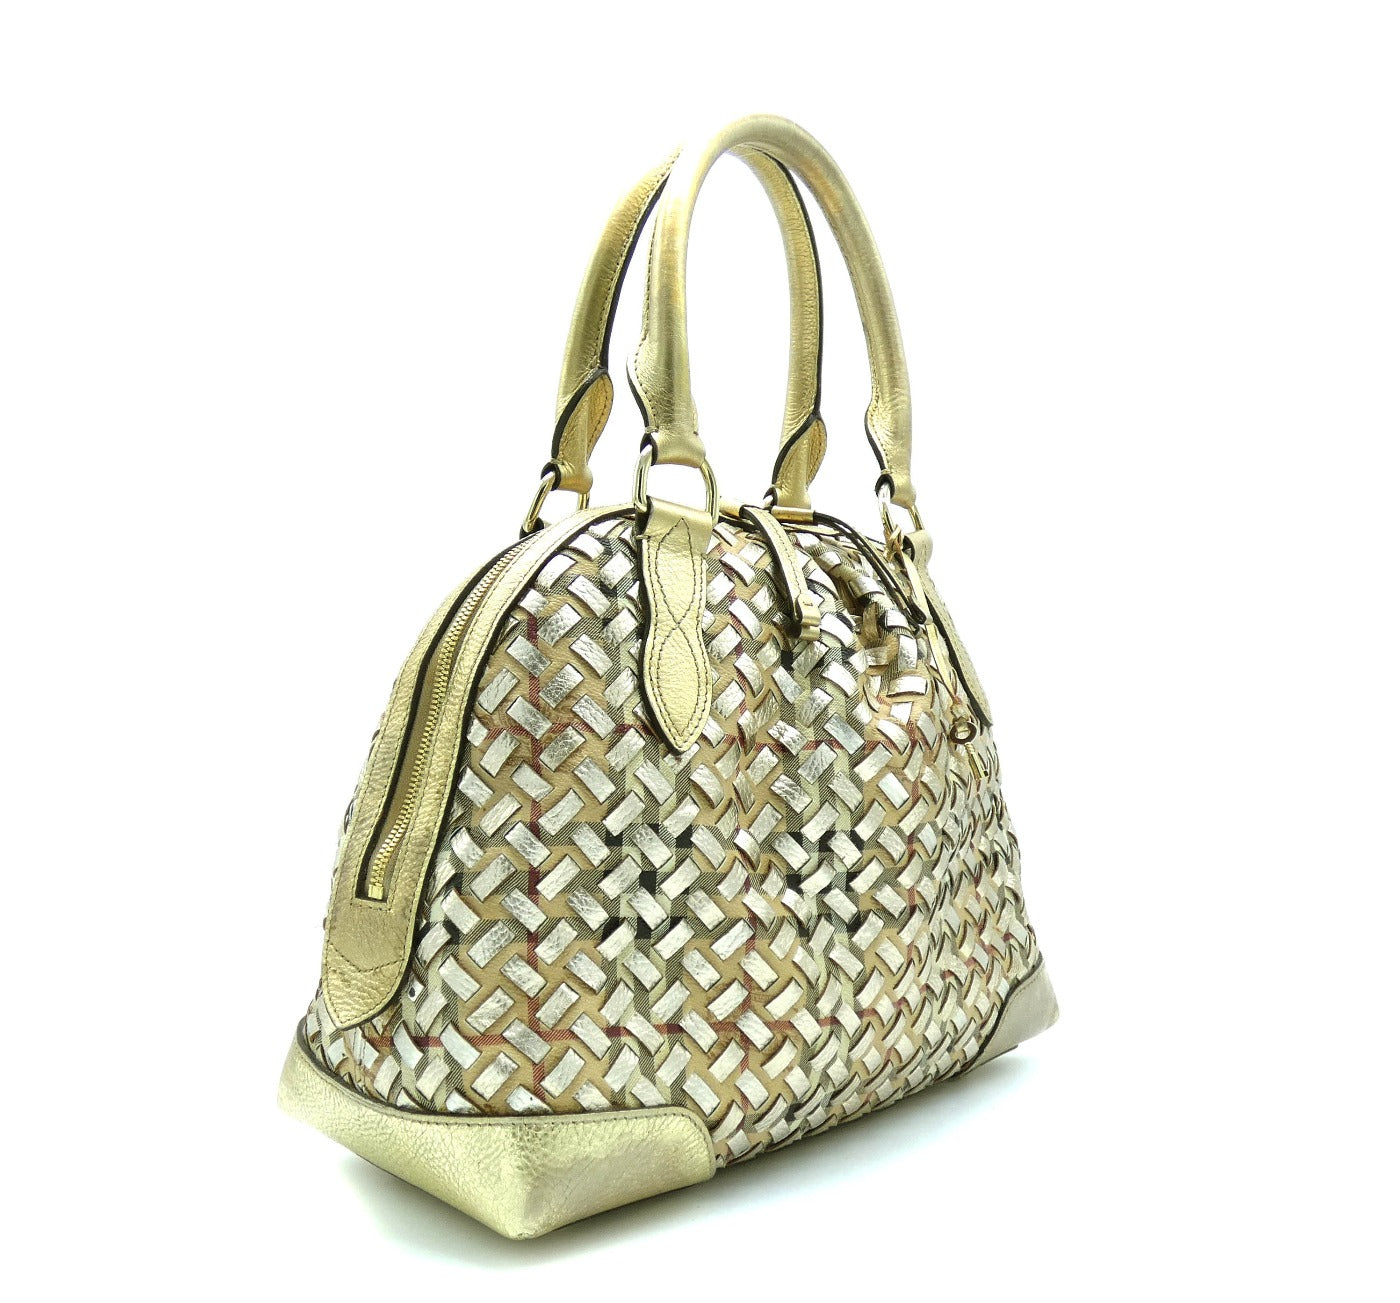 Burberry Prorsum Large Thornley Woven Champagne and Gold Leather Bag Bag Burberry